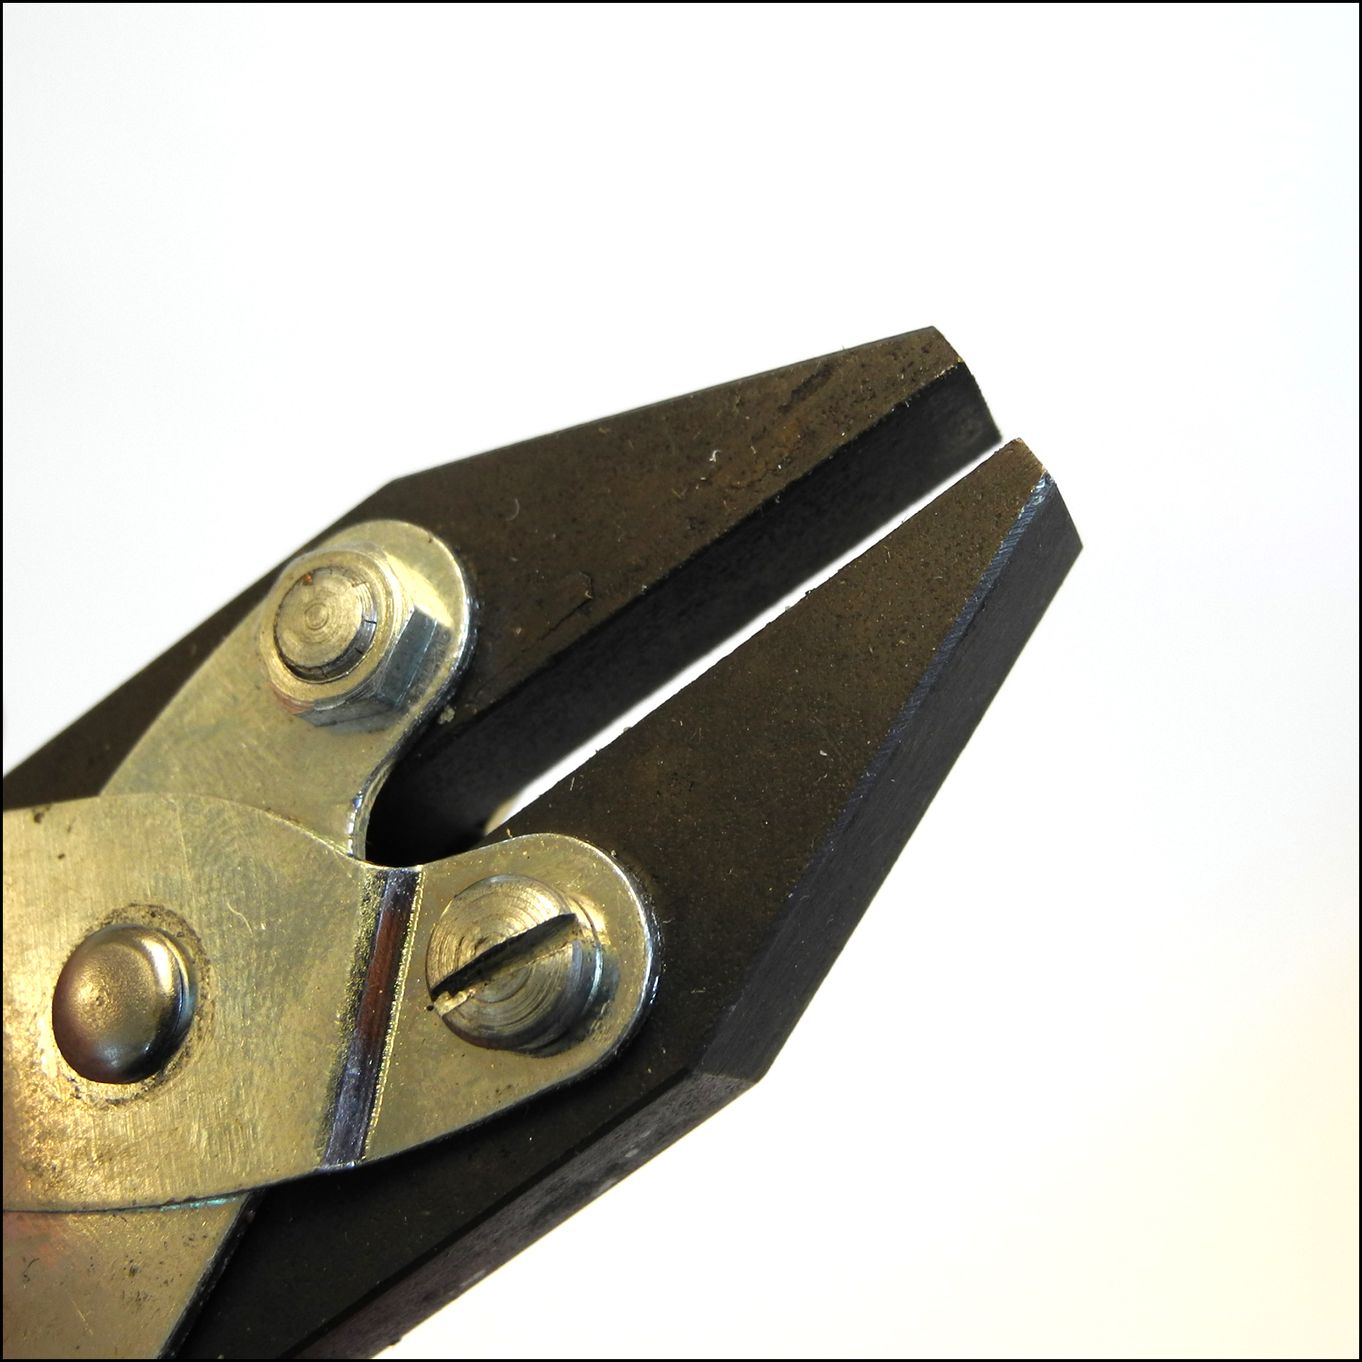 What are Diagonal Cutting Pliers & What Are They Used For? - Maun